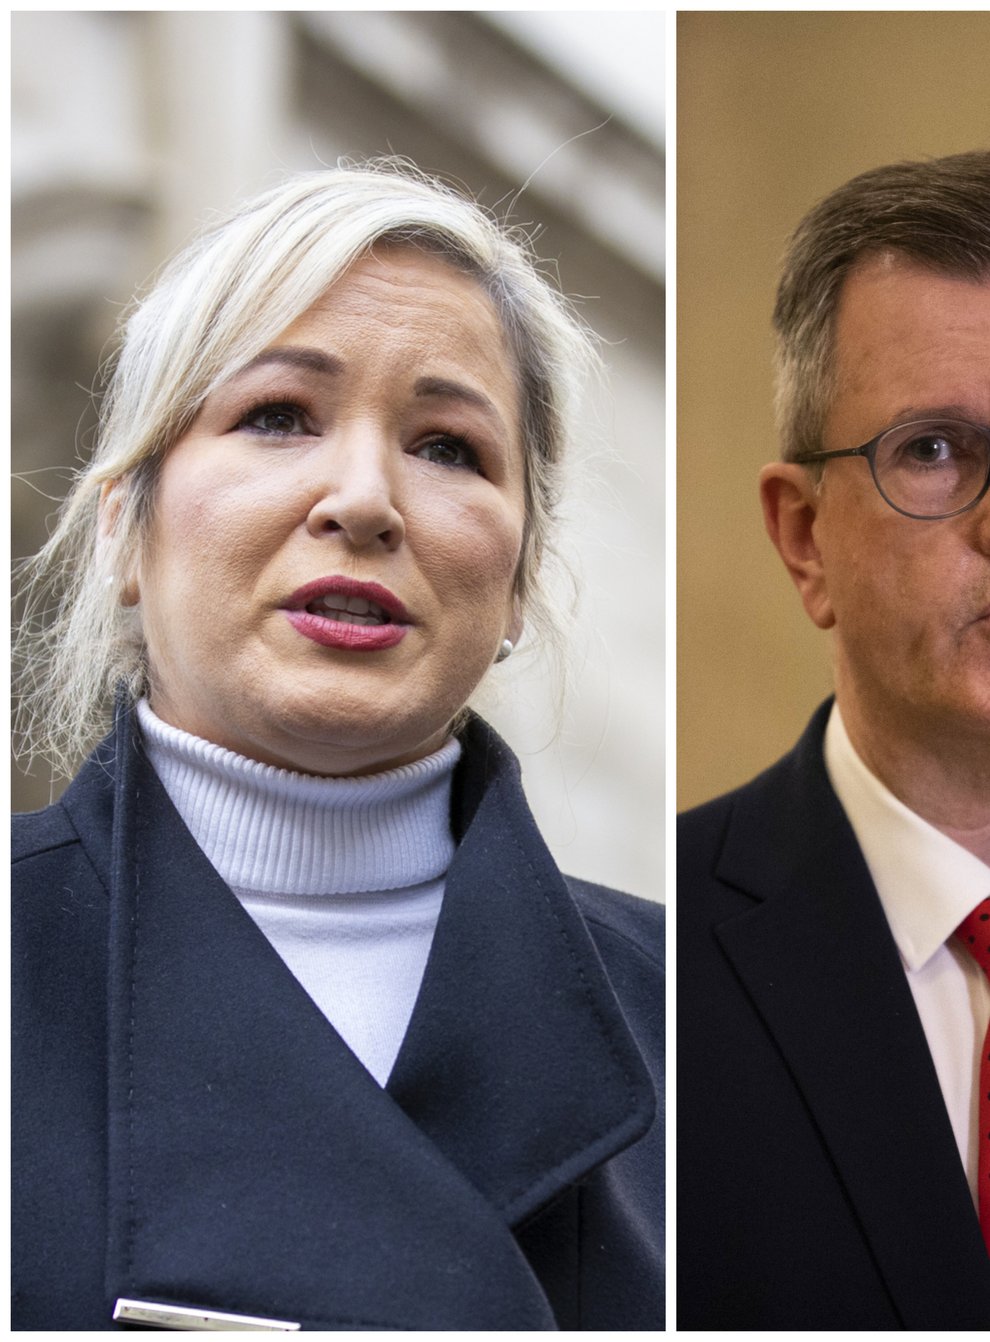 Sinn Fein vice-president Michelle O’Neill and DUP leader Jeffrey Donaldson are vying to top the poll in the Stormont election (PA)